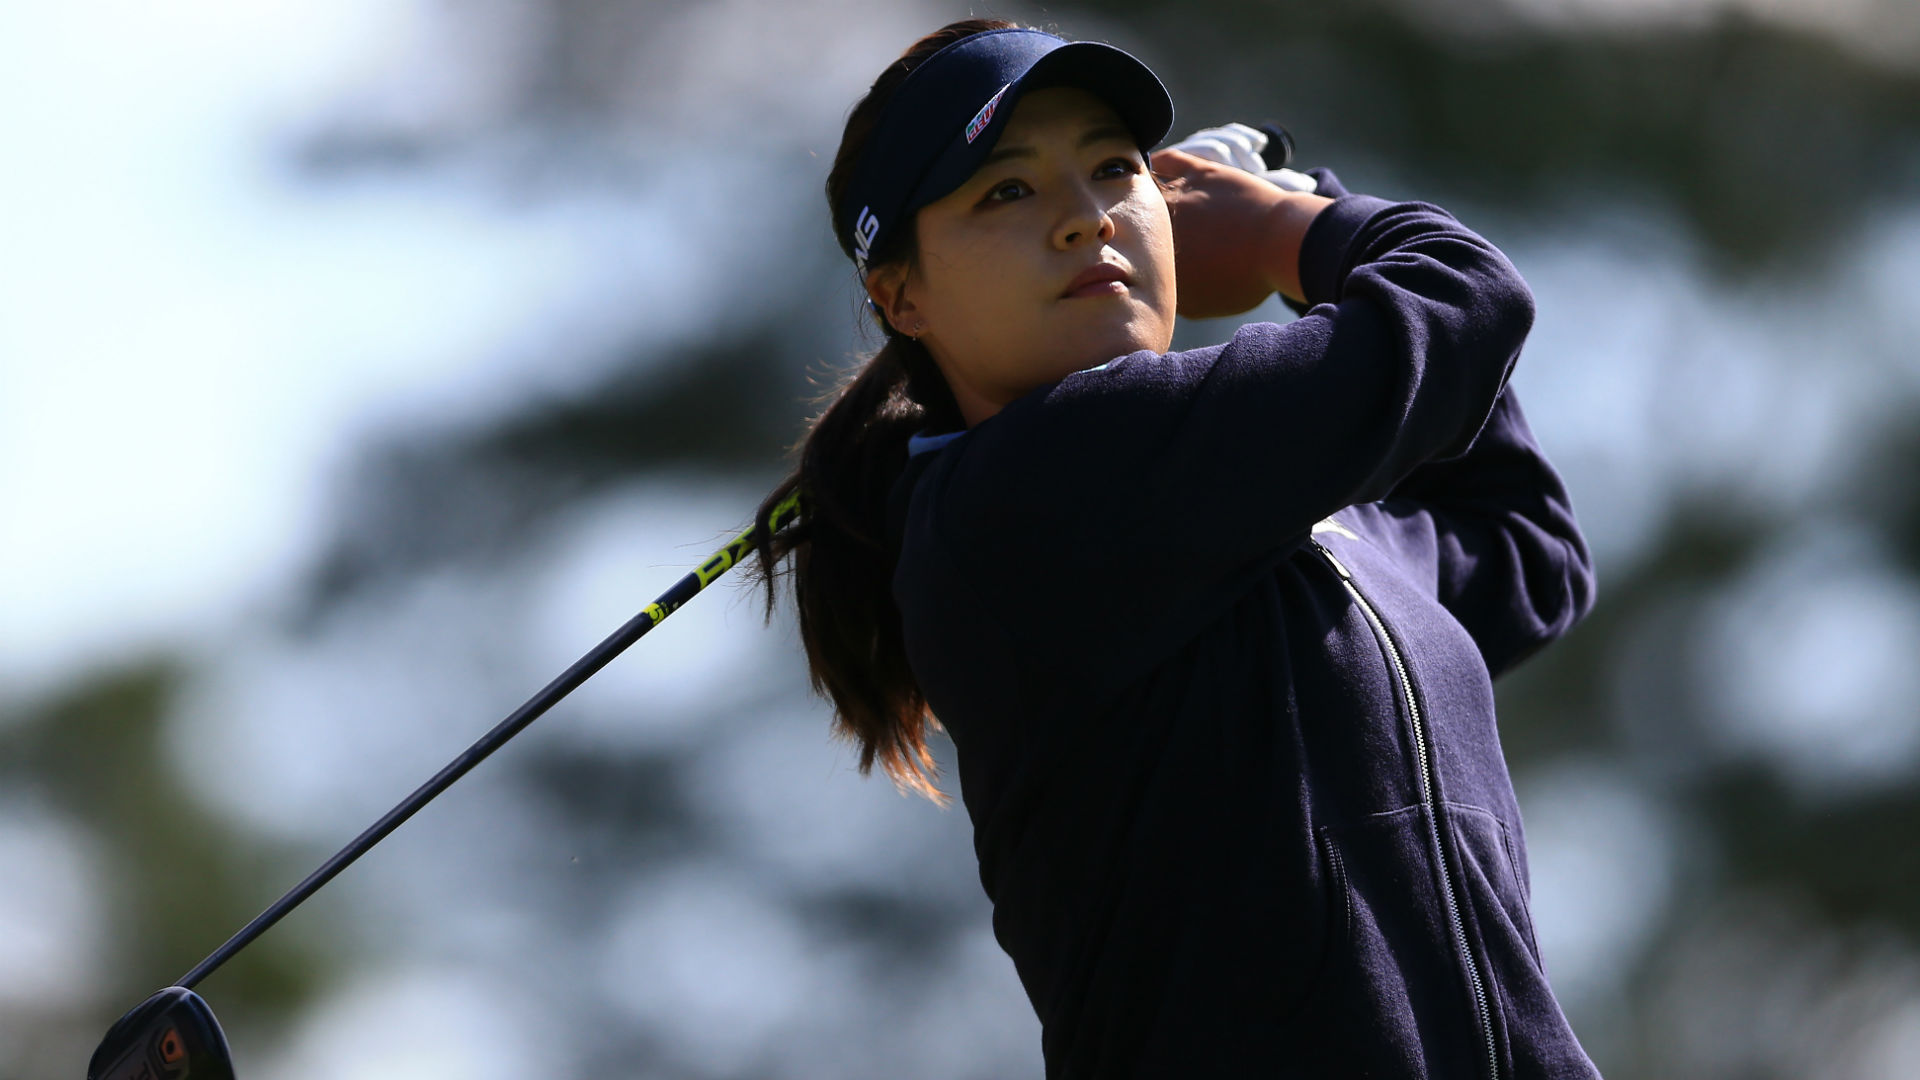 CP Women's Open 2017: Chun holds lead, three tied for second